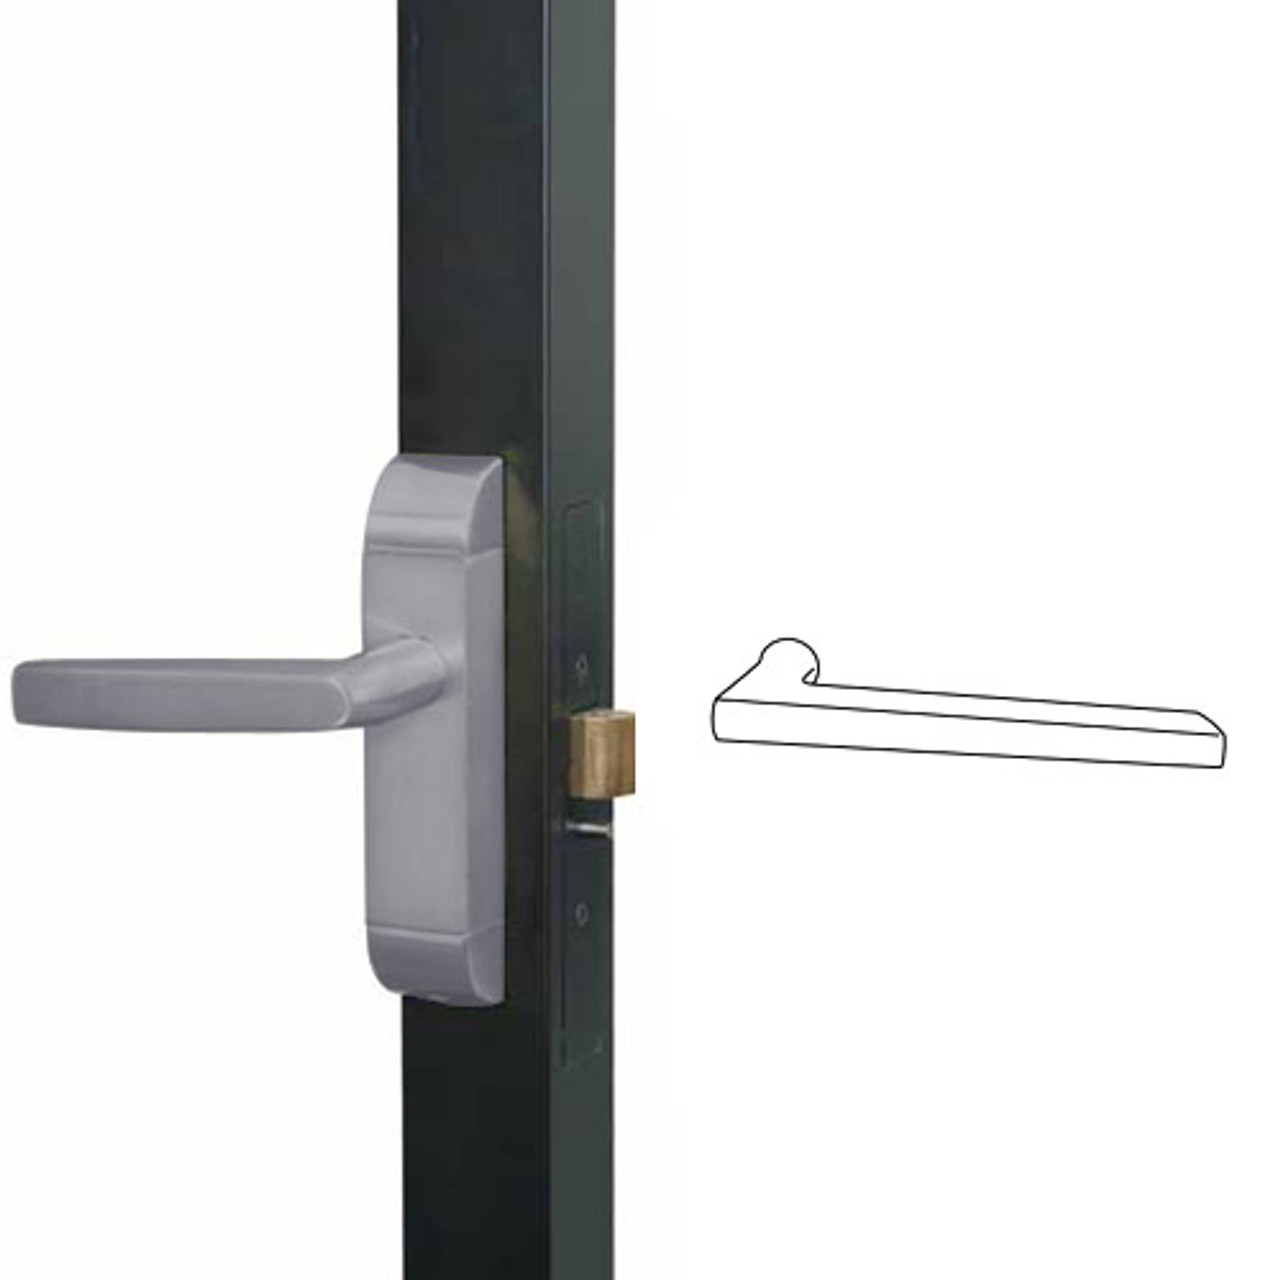 4600M-MD-552-US32D Adams Rite MD Designer Deadlatch handle in Satin Stainless Finish